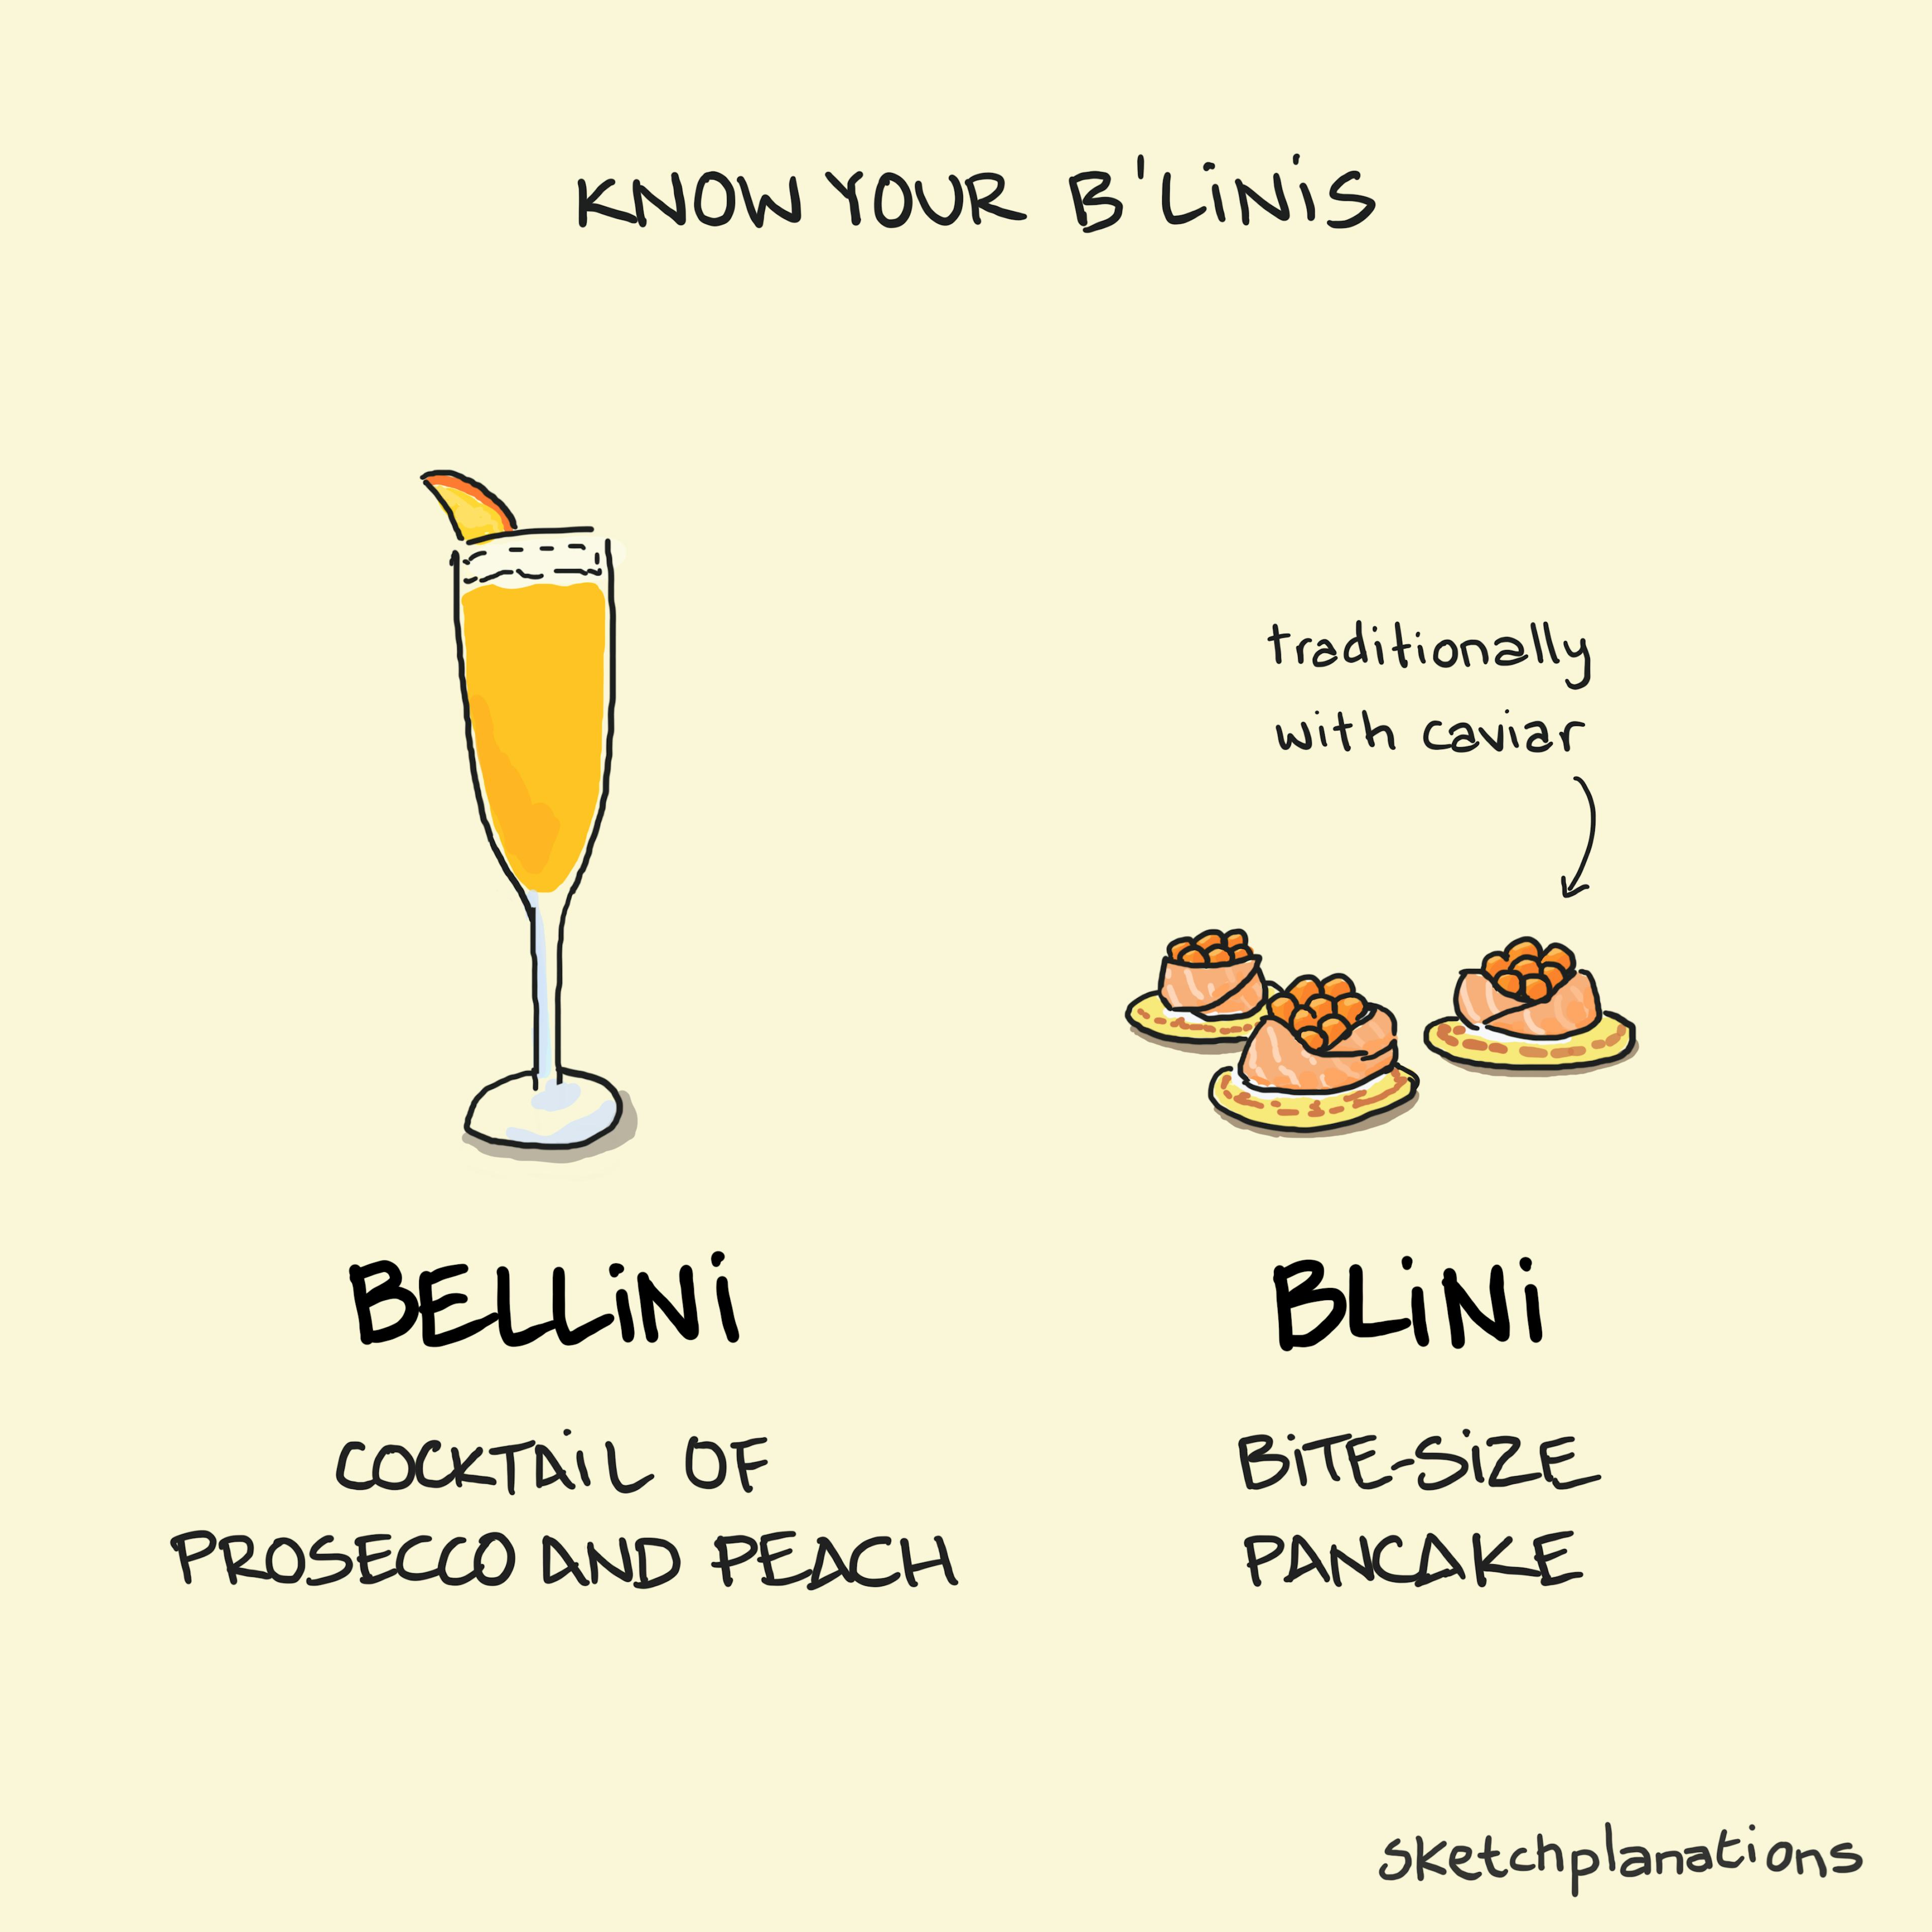 Bellini or blini illustration: a glass of a bellini—a prosecco and peach cocktail—shown next to blini—small Russian pancakes with smoked salmon and caviar